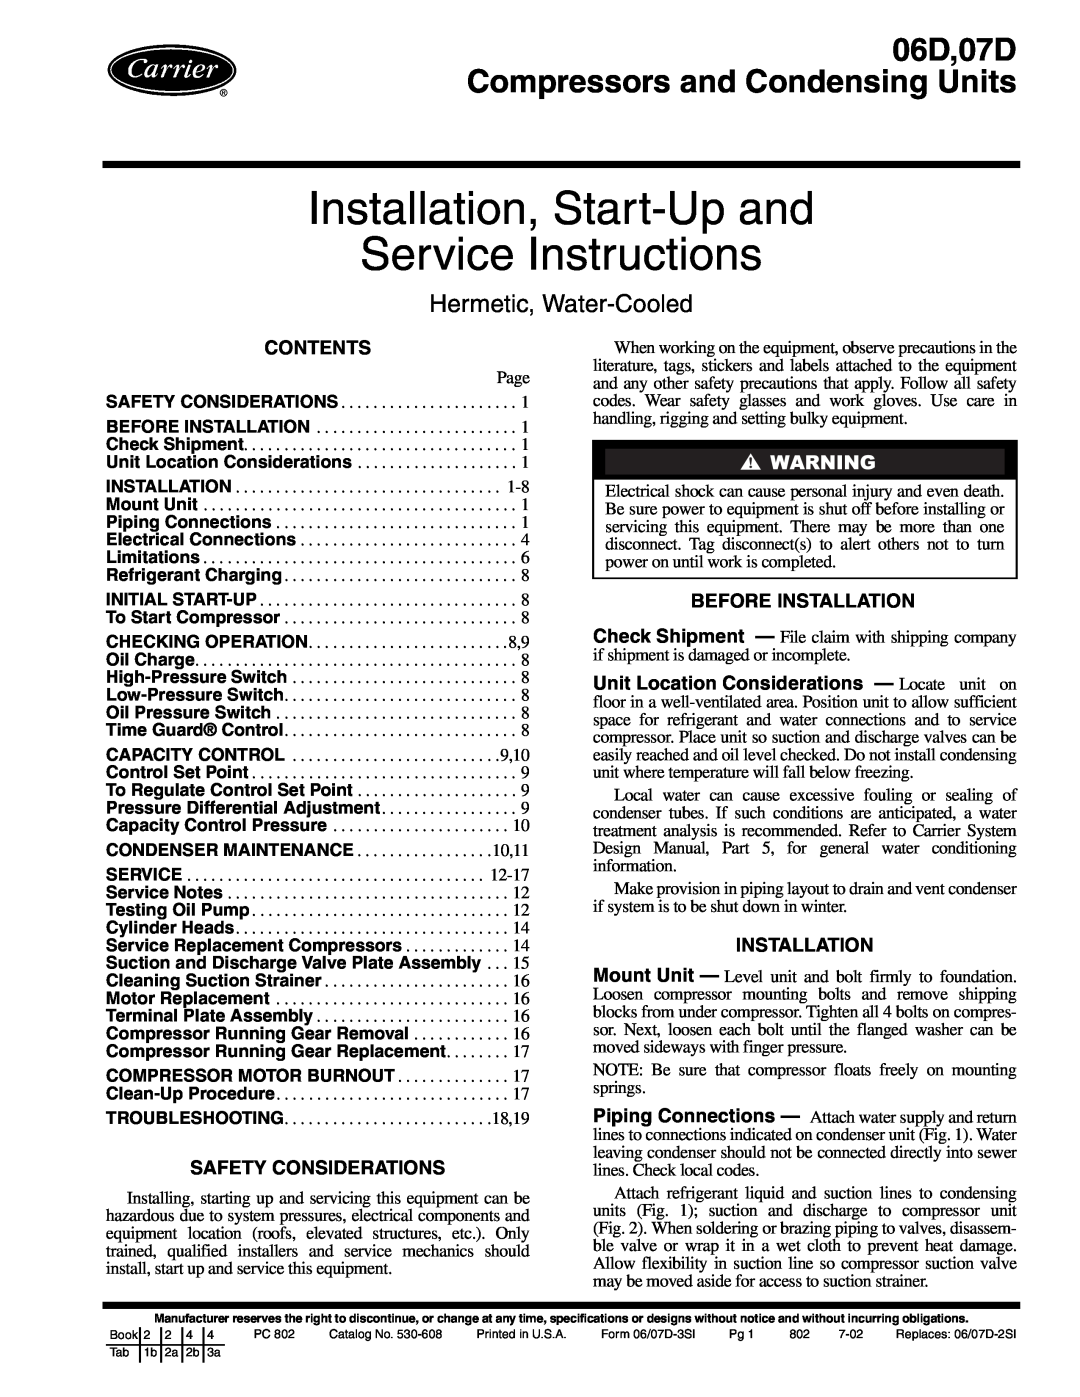 Carrier 06D specifications Contents, Before Installation, Safety Considerations, Service Replacement Compressors 